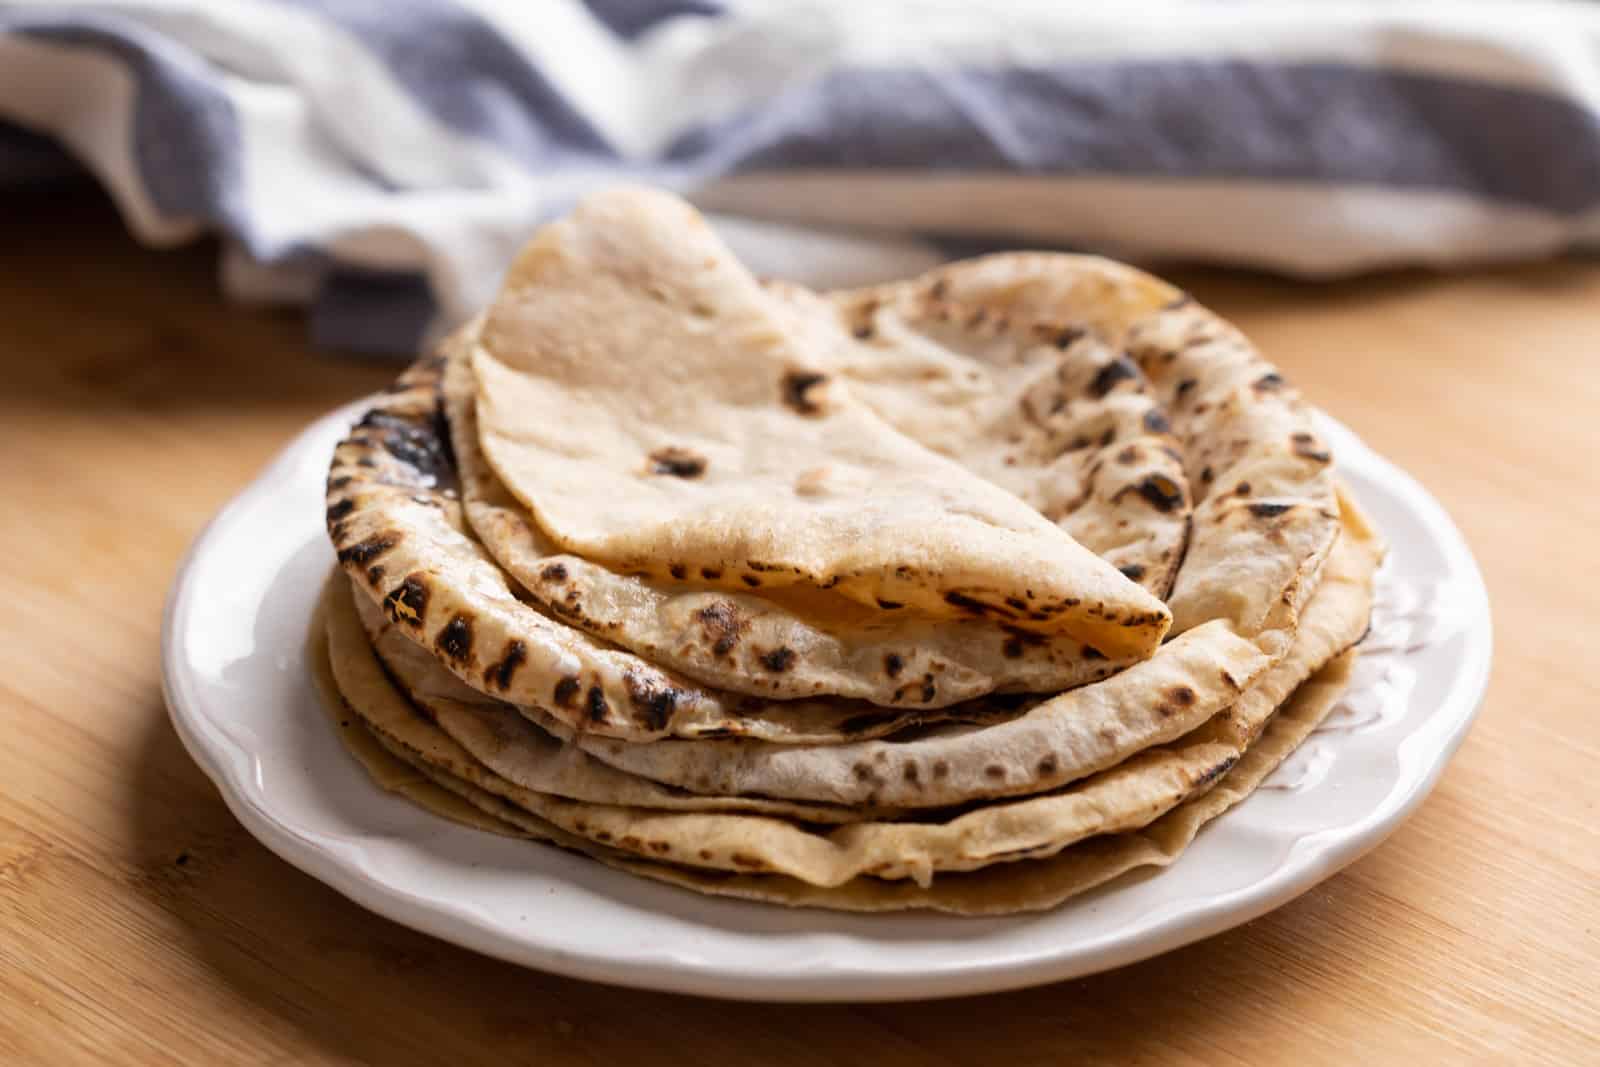 Soft rotis stacked on top of one another